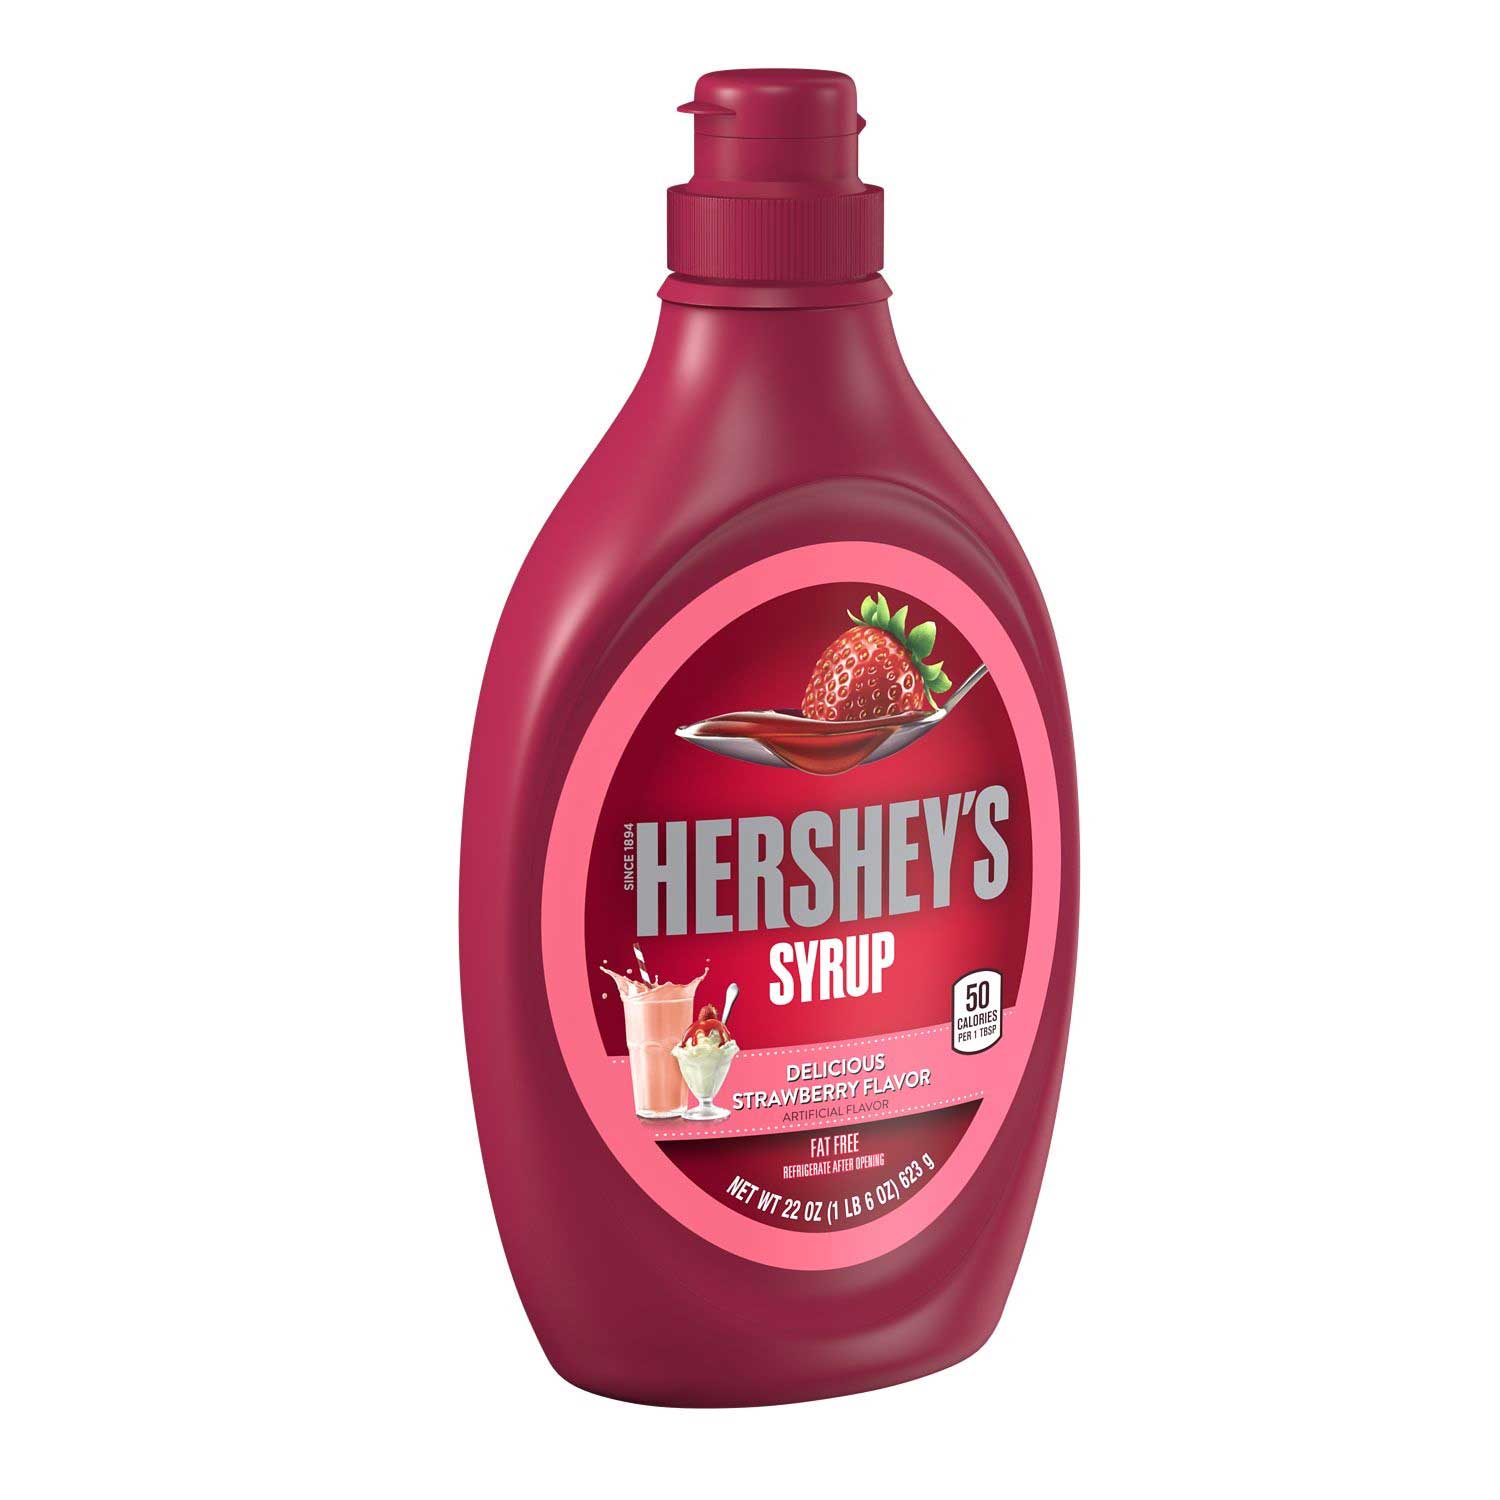 Hershey's Strawberry Flavored Syrup, 22 Ounce Bottle -- 12 per case